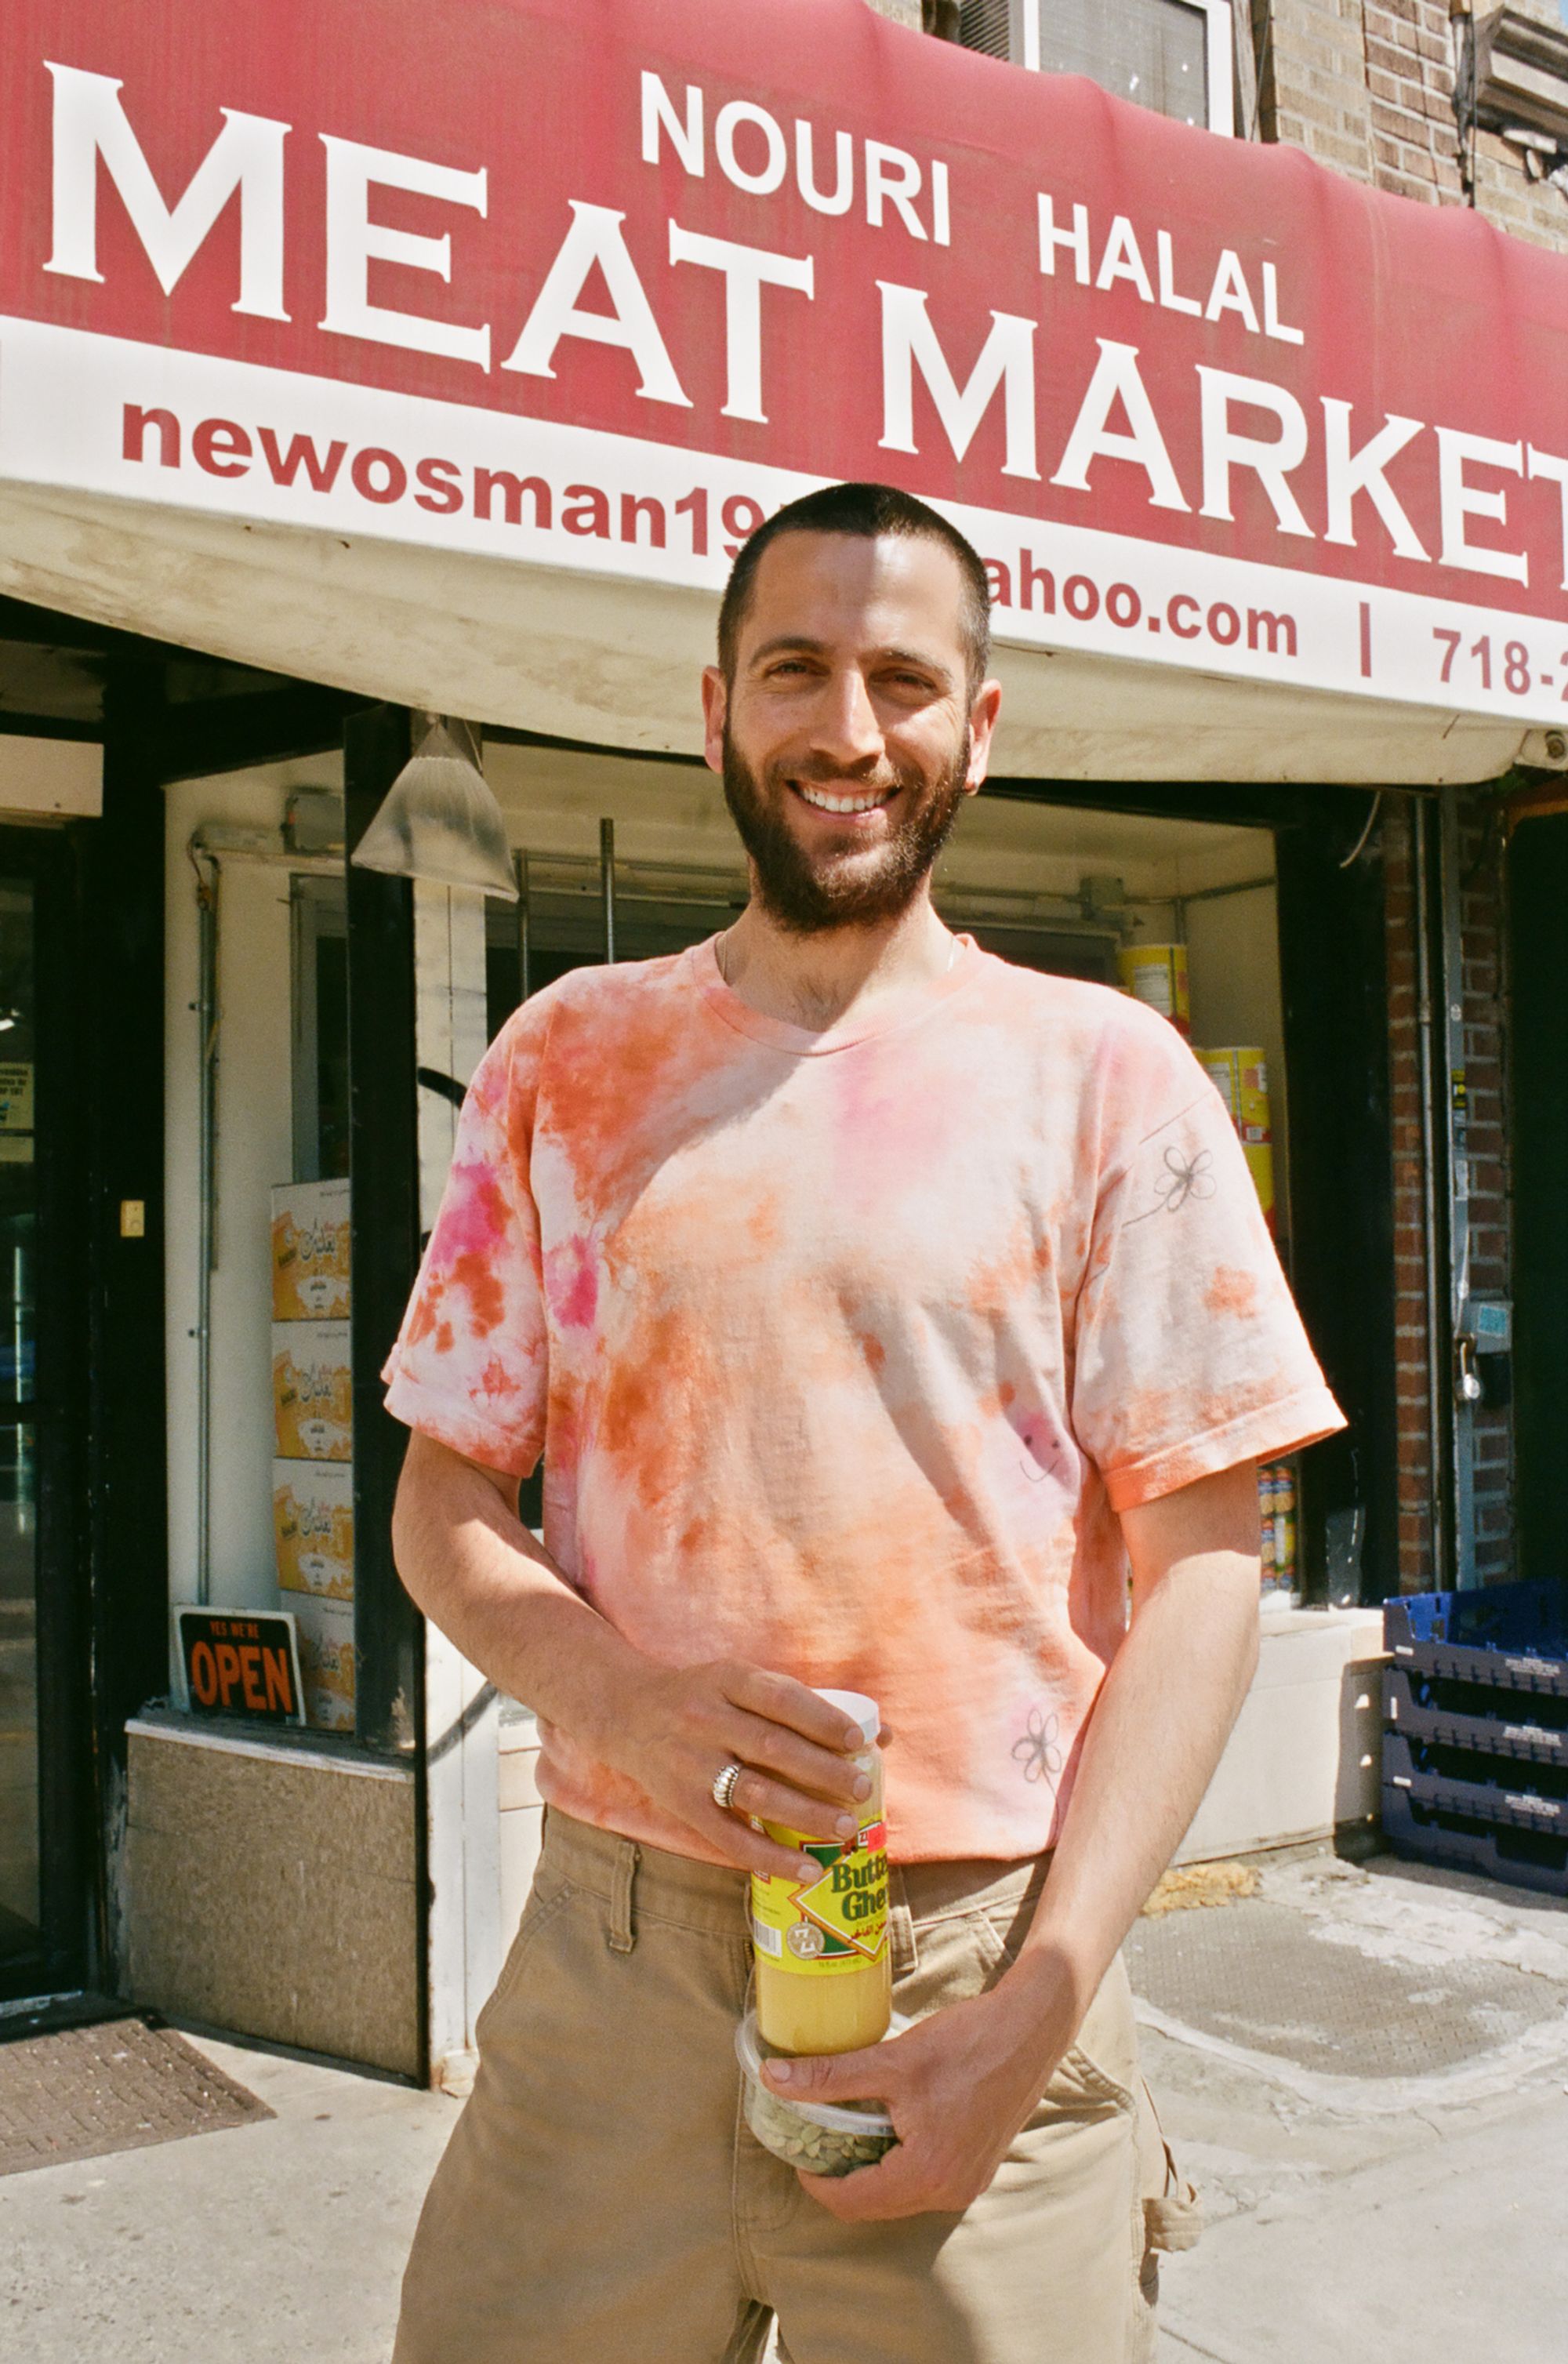 Loren Abramovitch stands in front of Halal Nouri Meat Market 